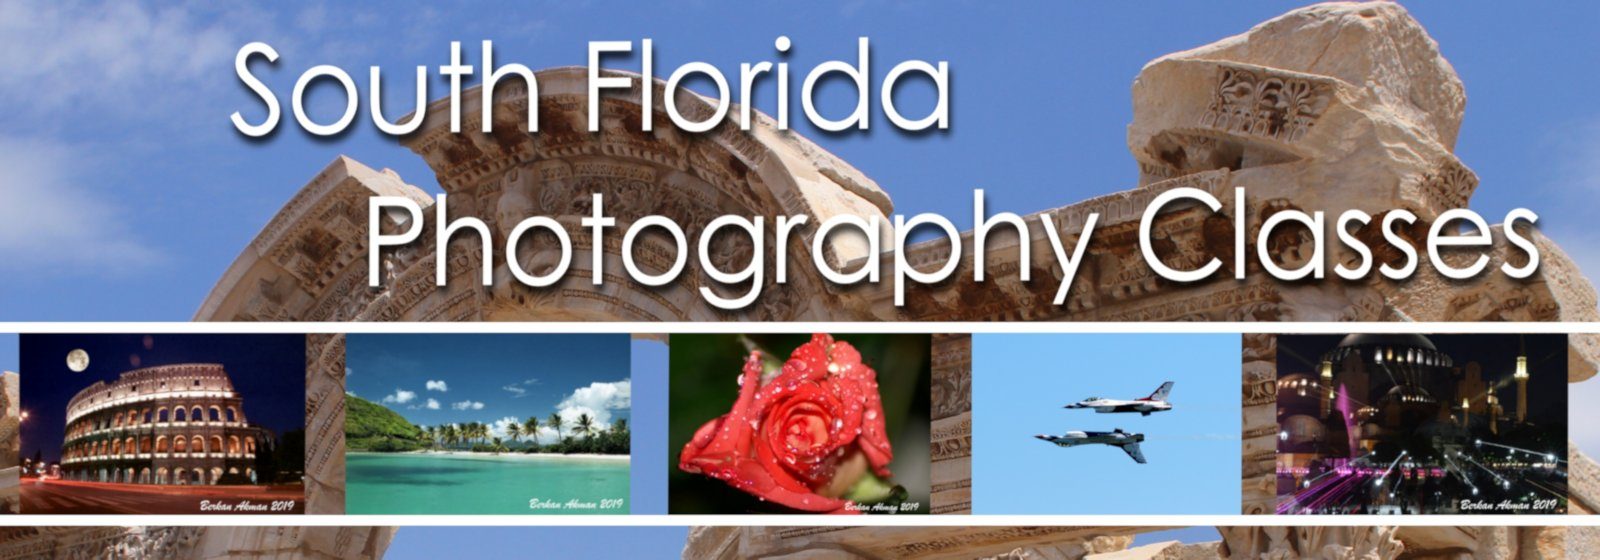 South Florida Photography Classes